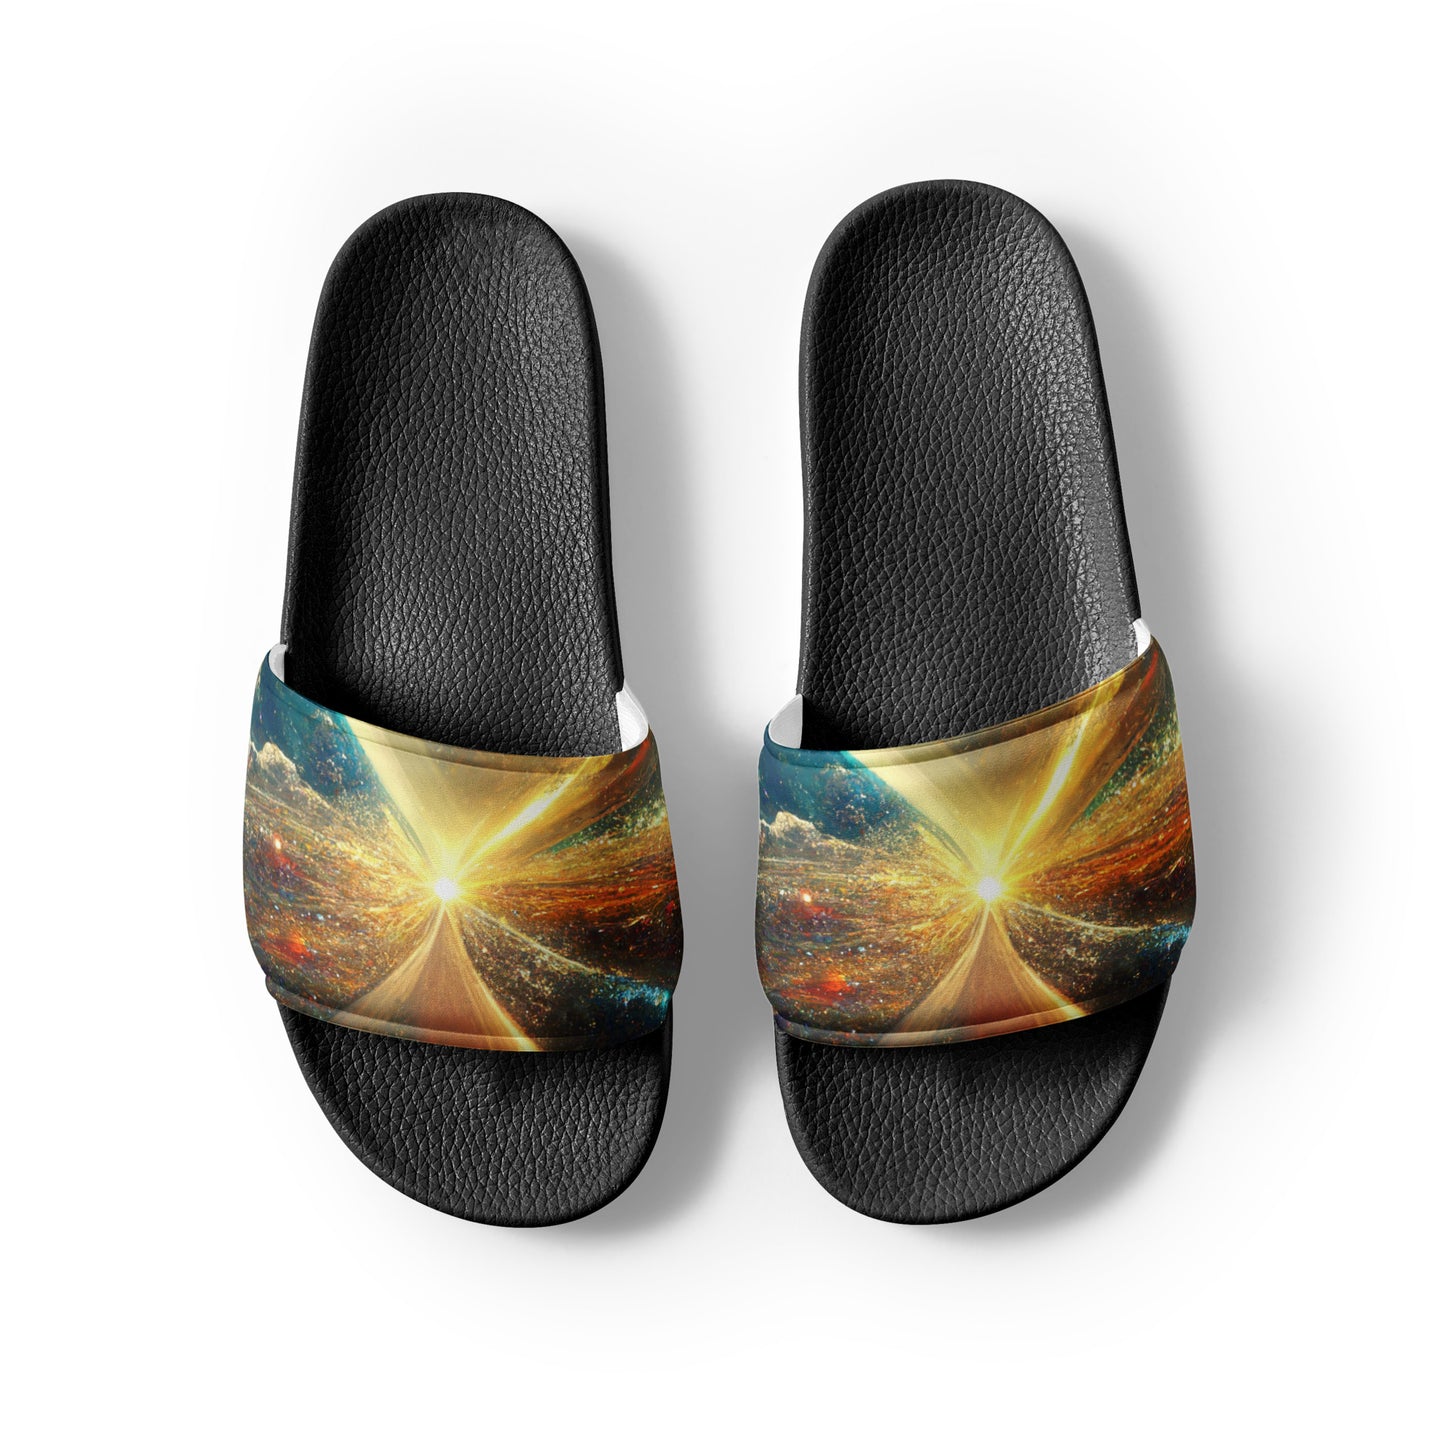 Men's Slides: Cushioned Faux Leather Straps, Lightweight PU Outsole, and Textured Footbed